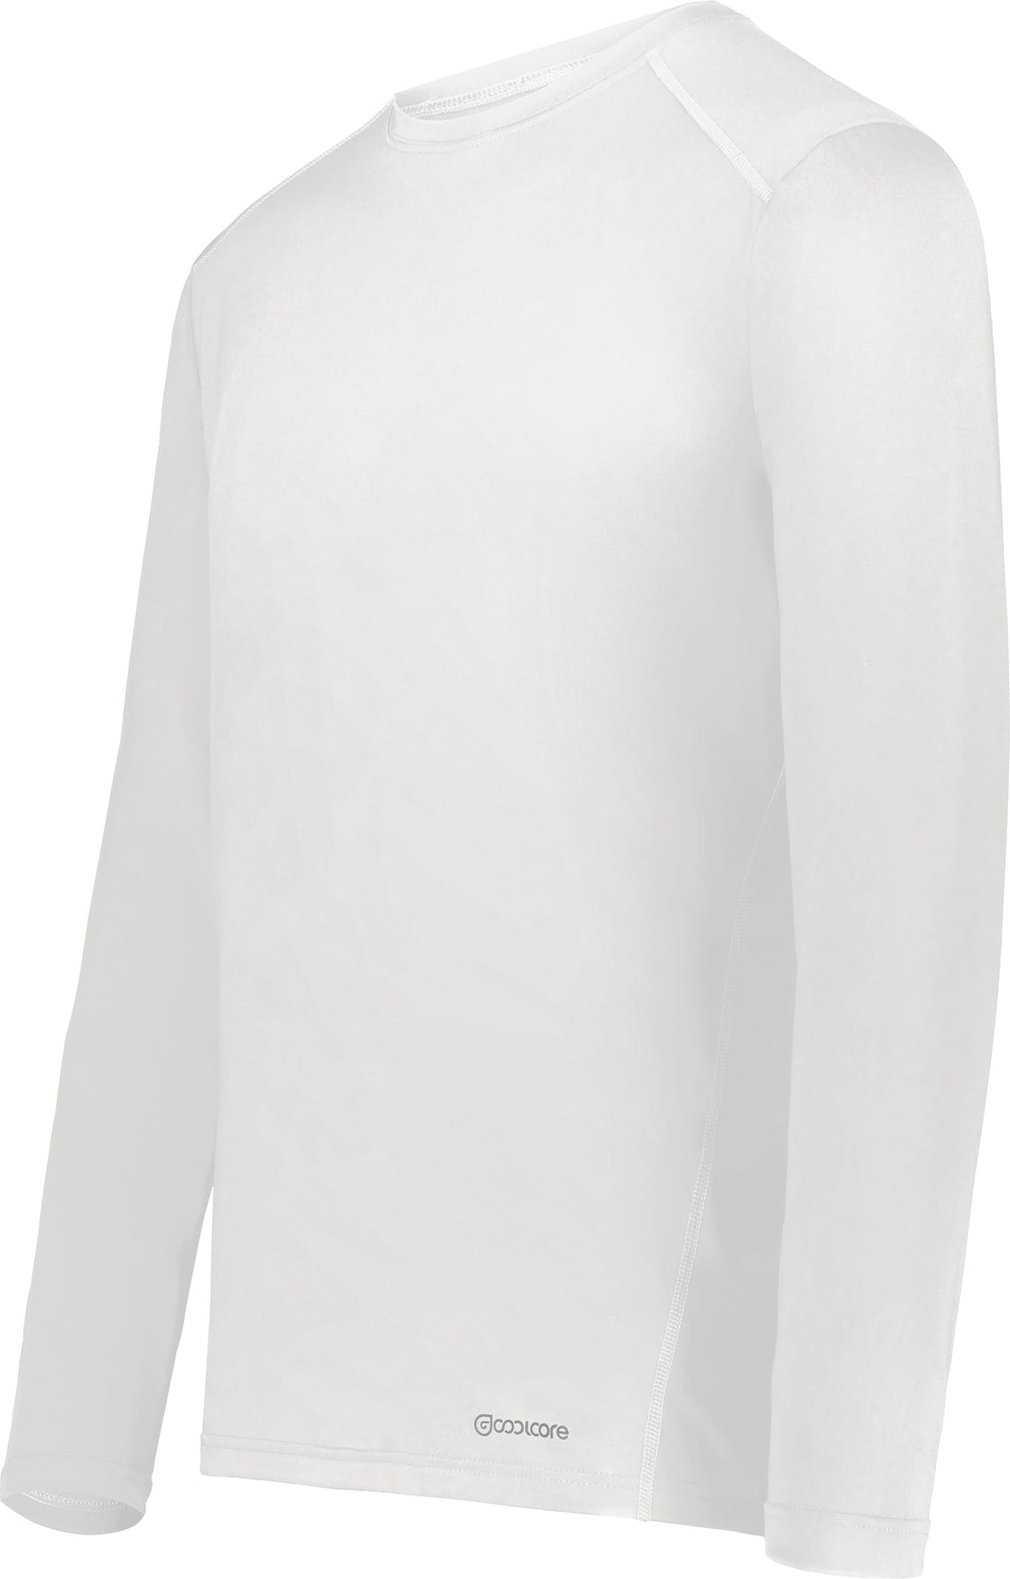 Holloway 222138 Coolcore Essential Long Sleeve Tee - White - HIT a Double